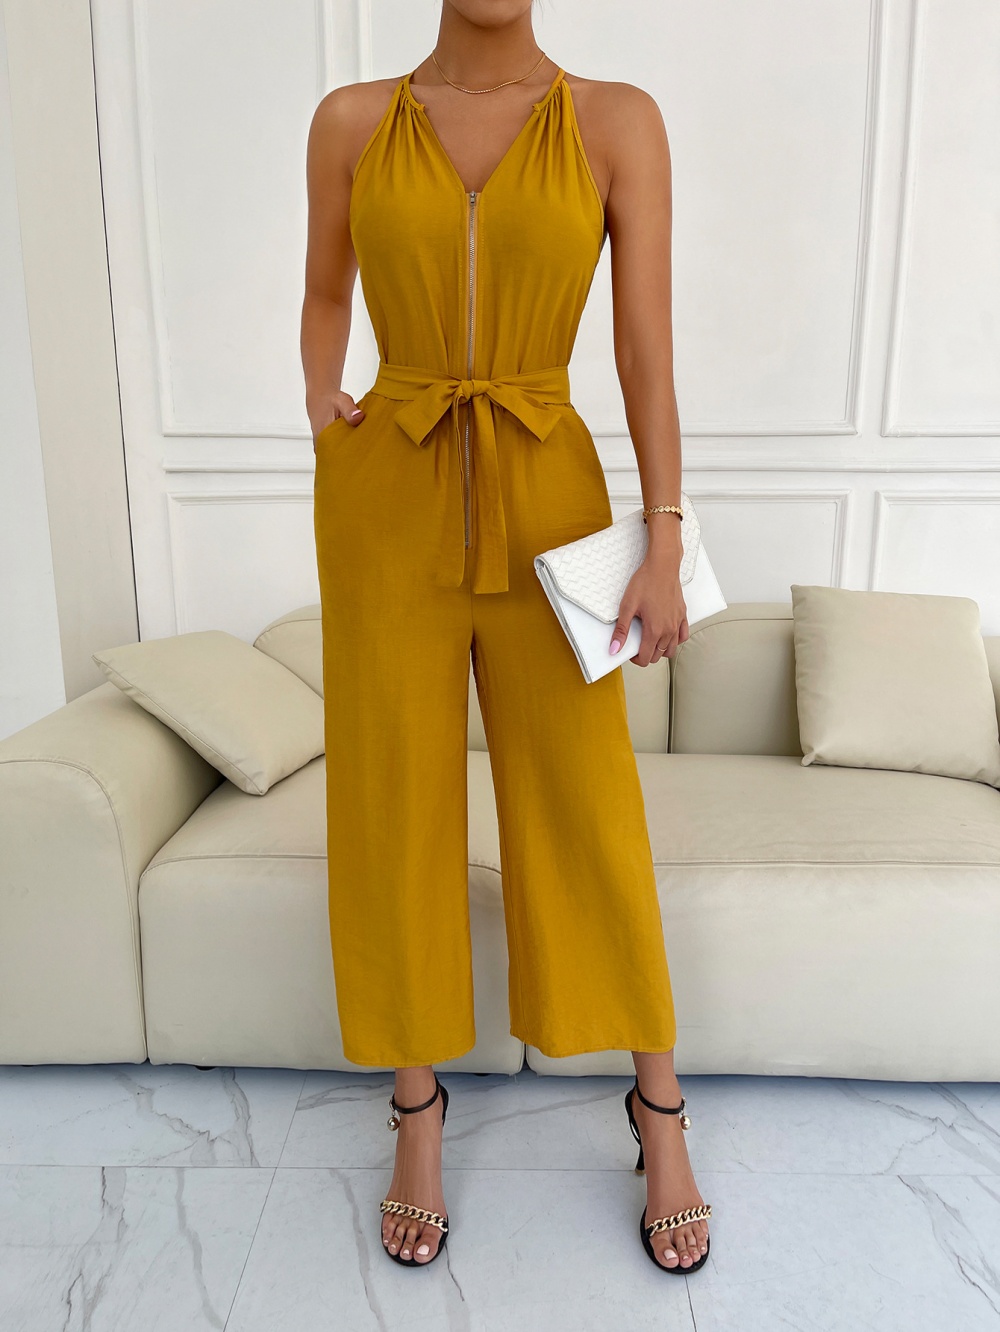 Commuting pure spring and summer sexy V-neck bandage jumpsuit